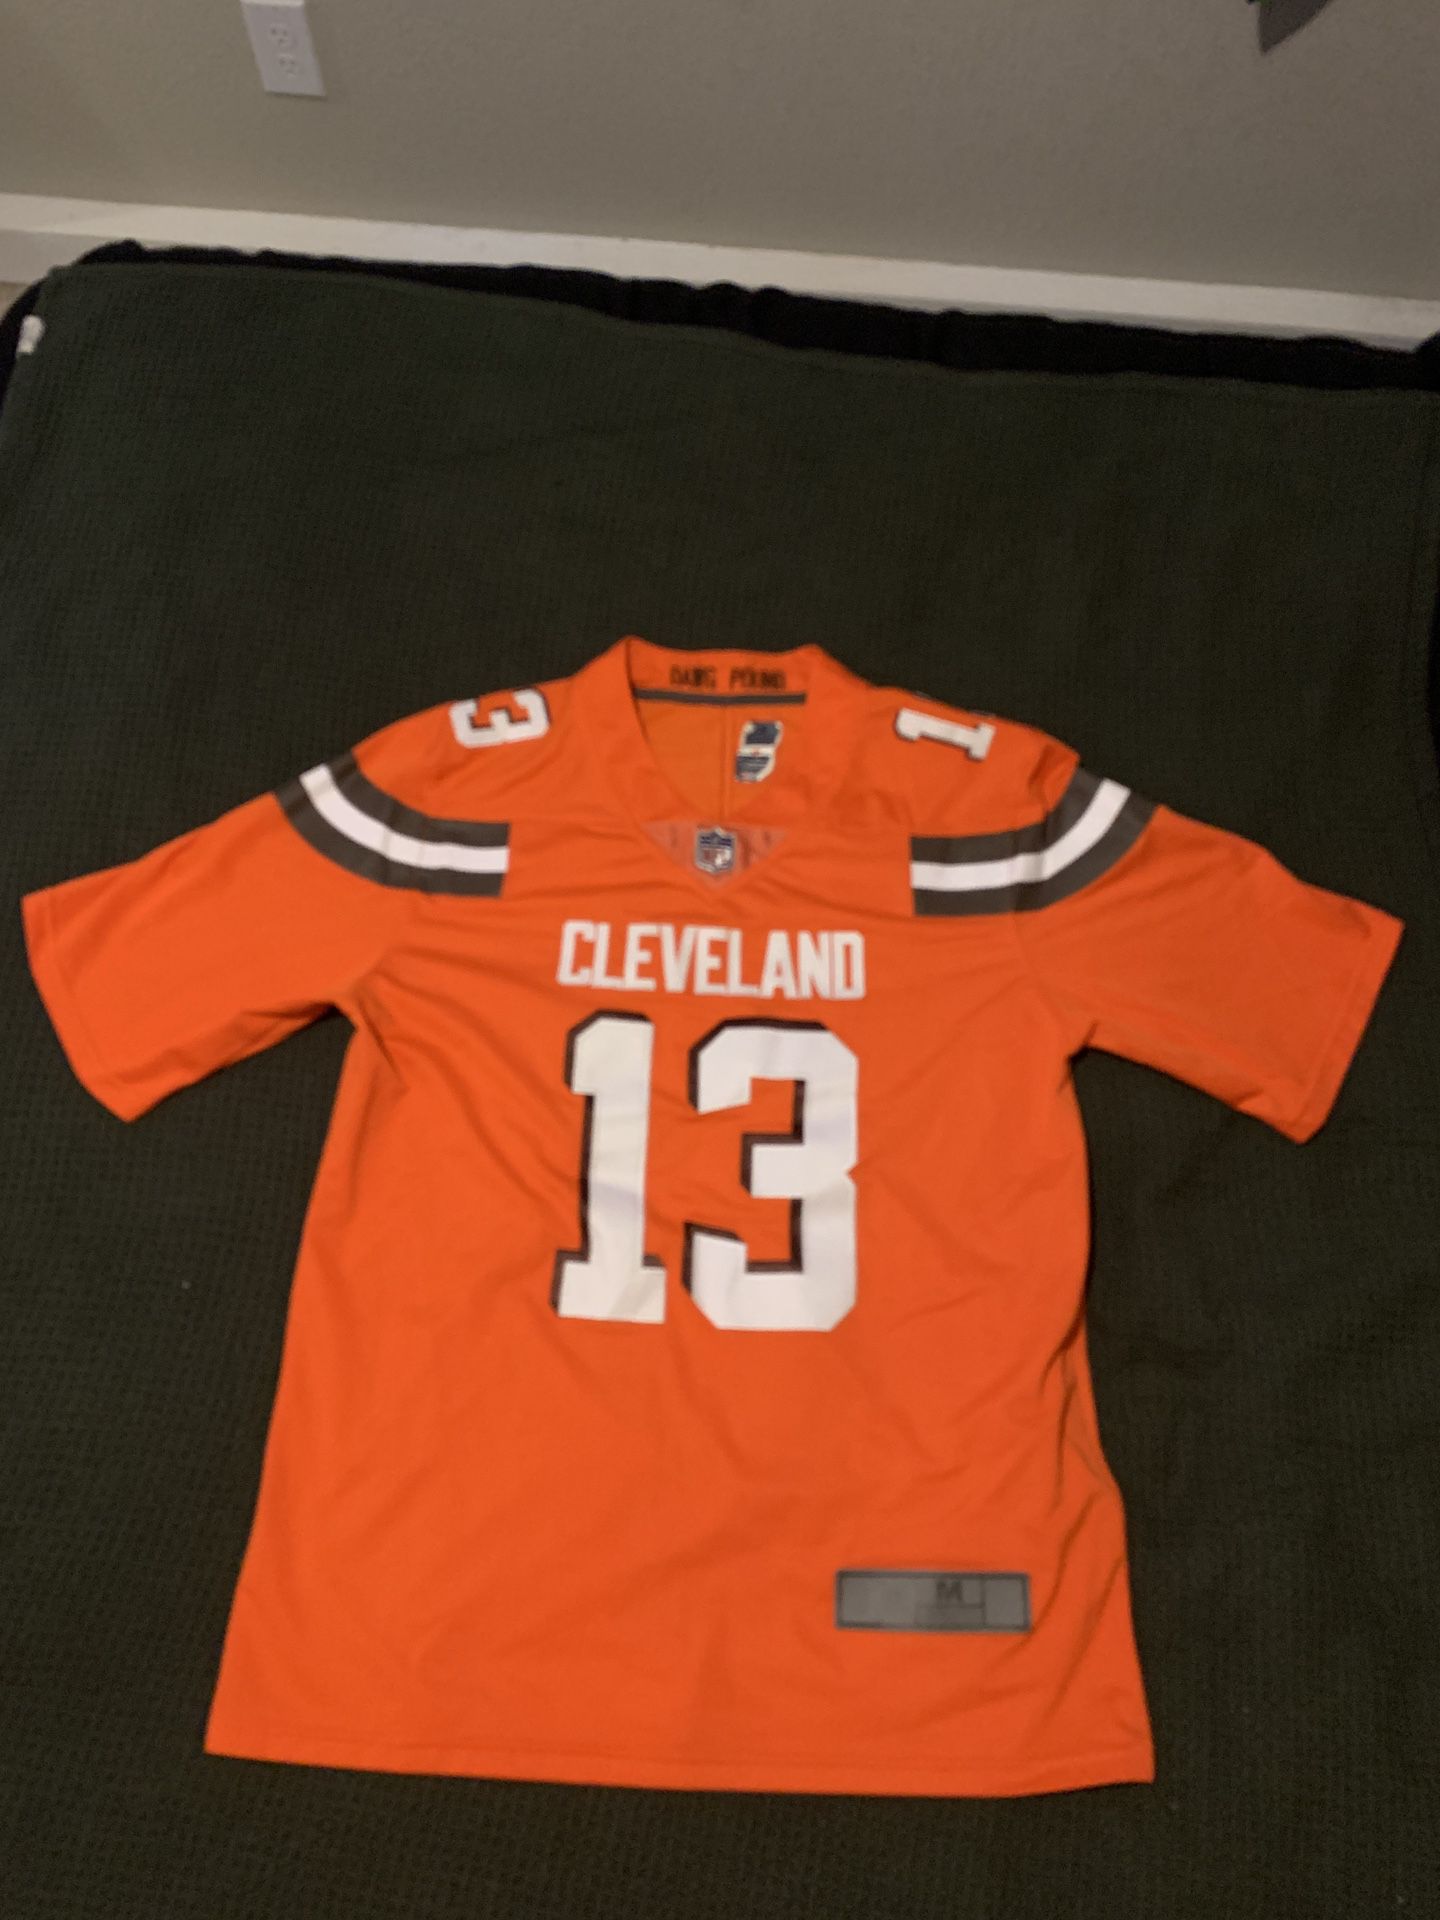 Cleveland Browns #13 NFL Jersey Stitched 